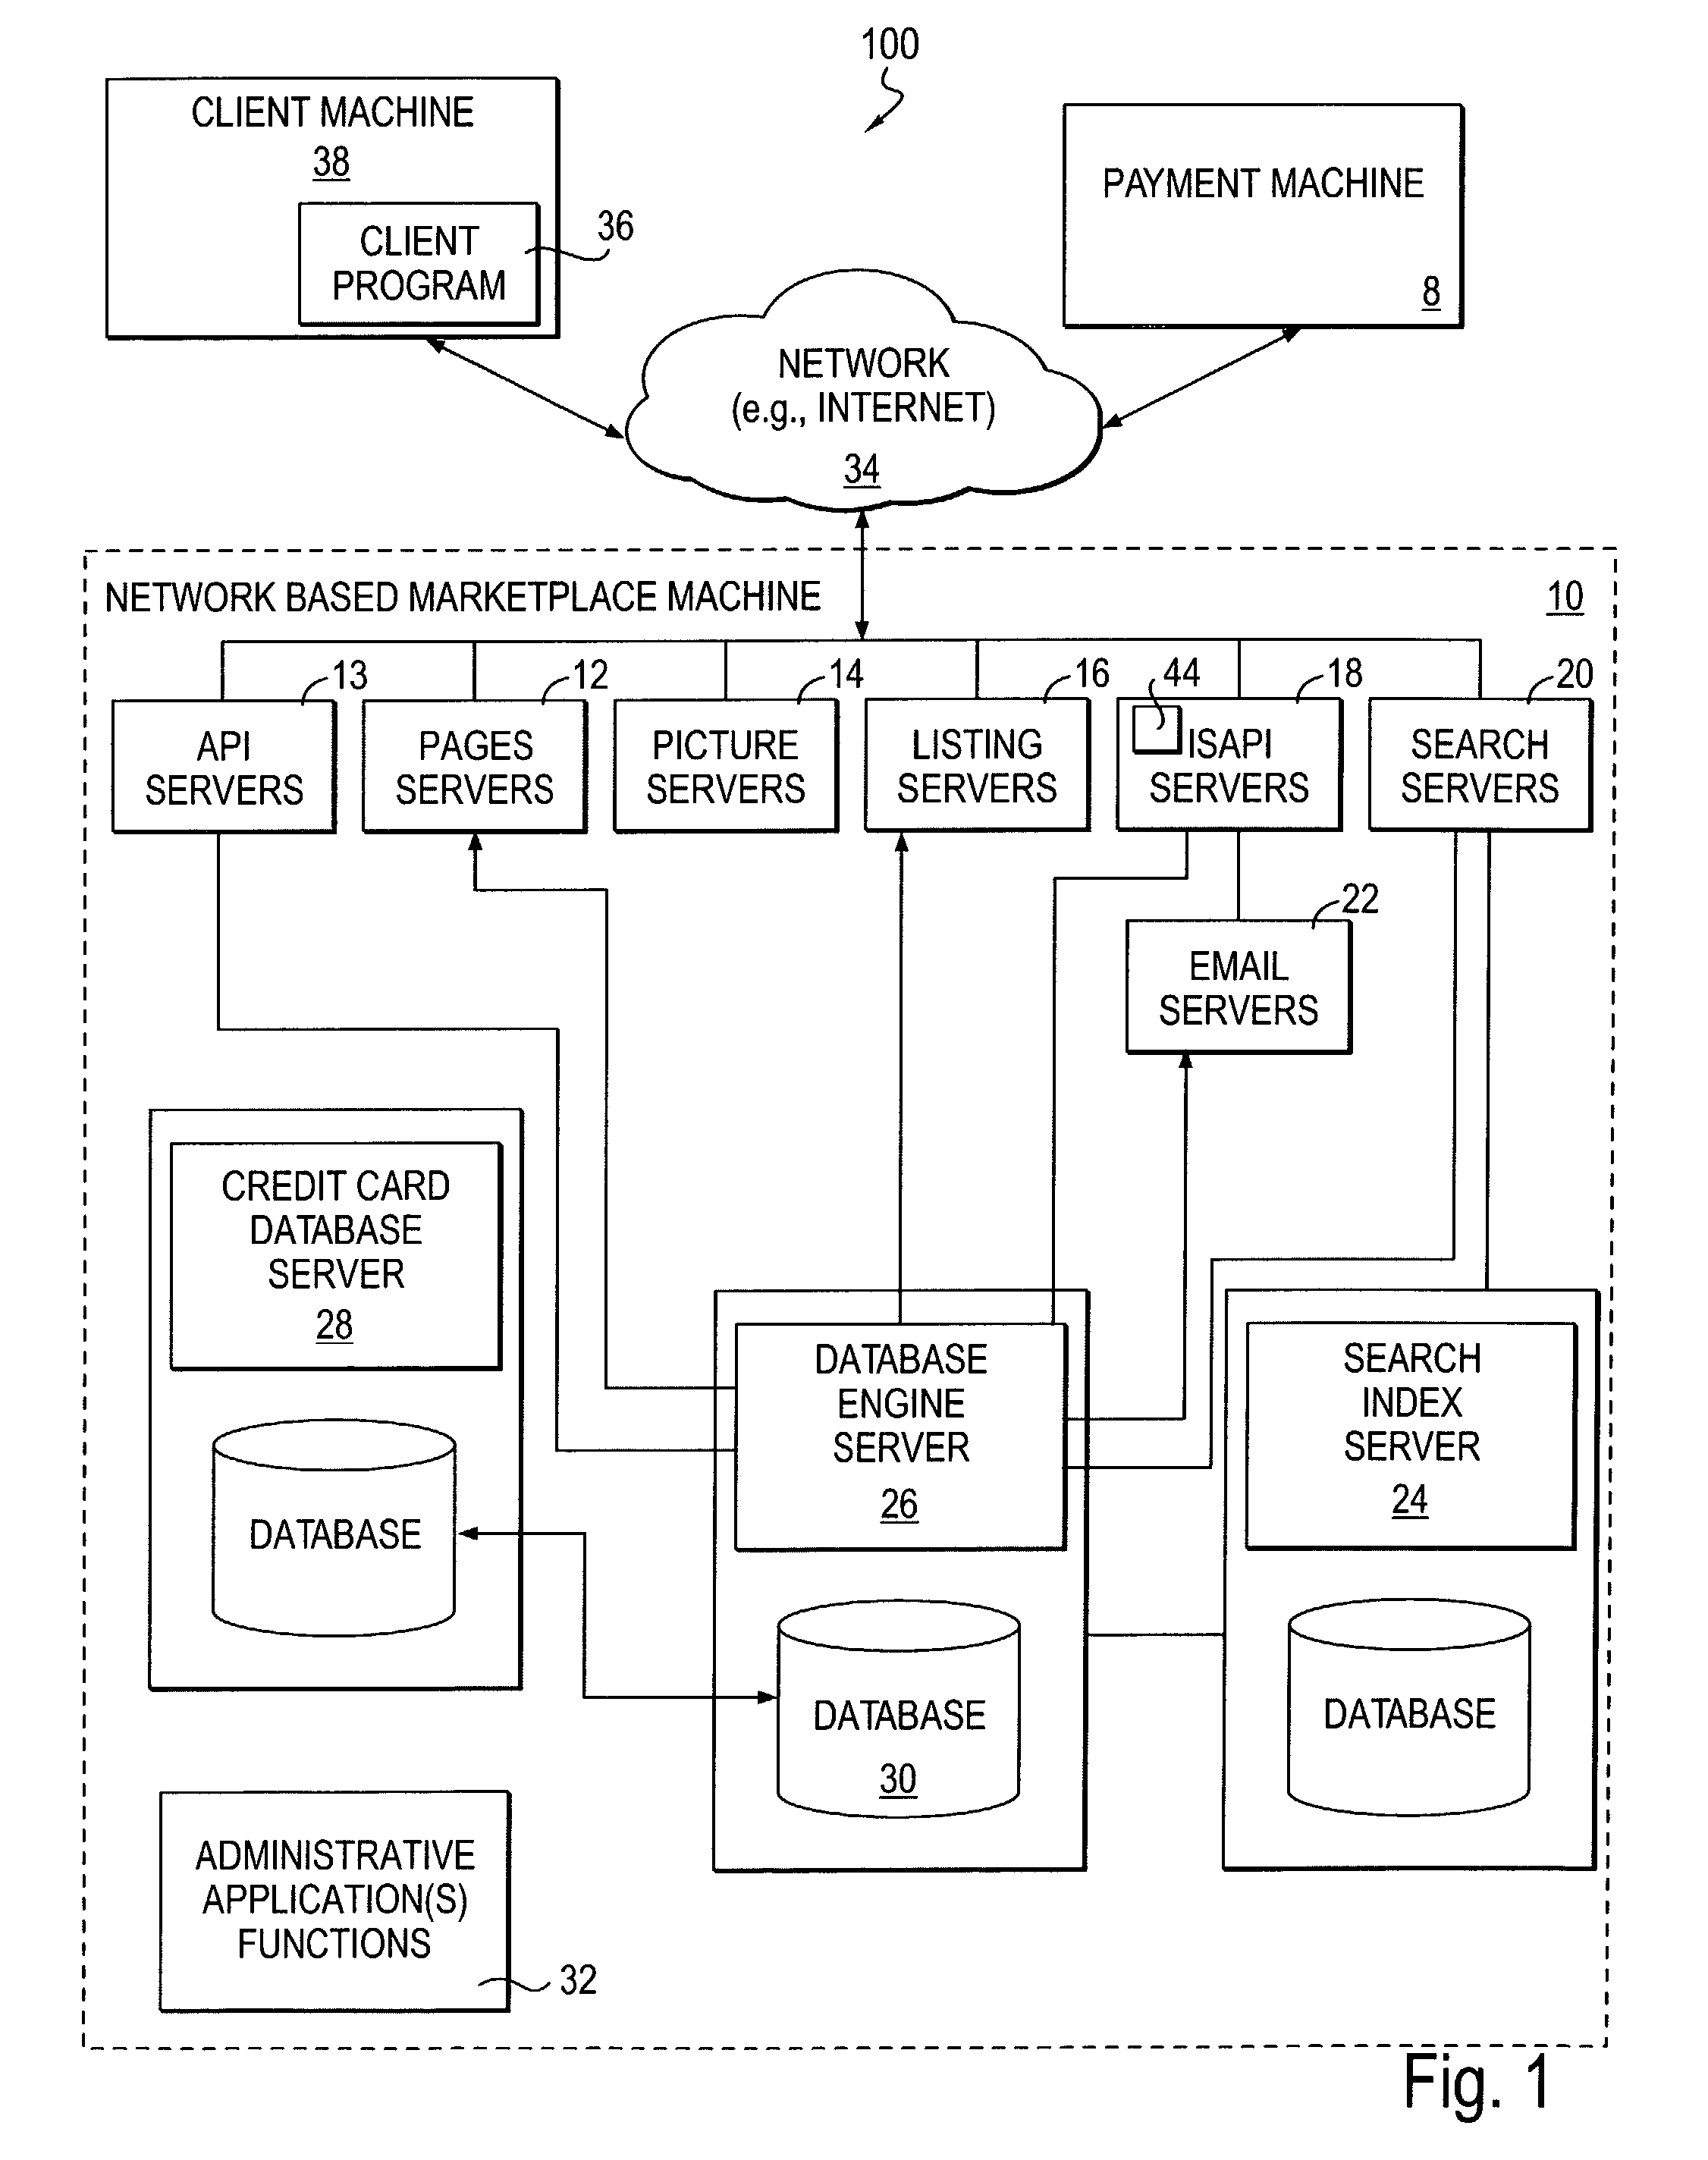 Method and system to automate payment for a commerce transaction